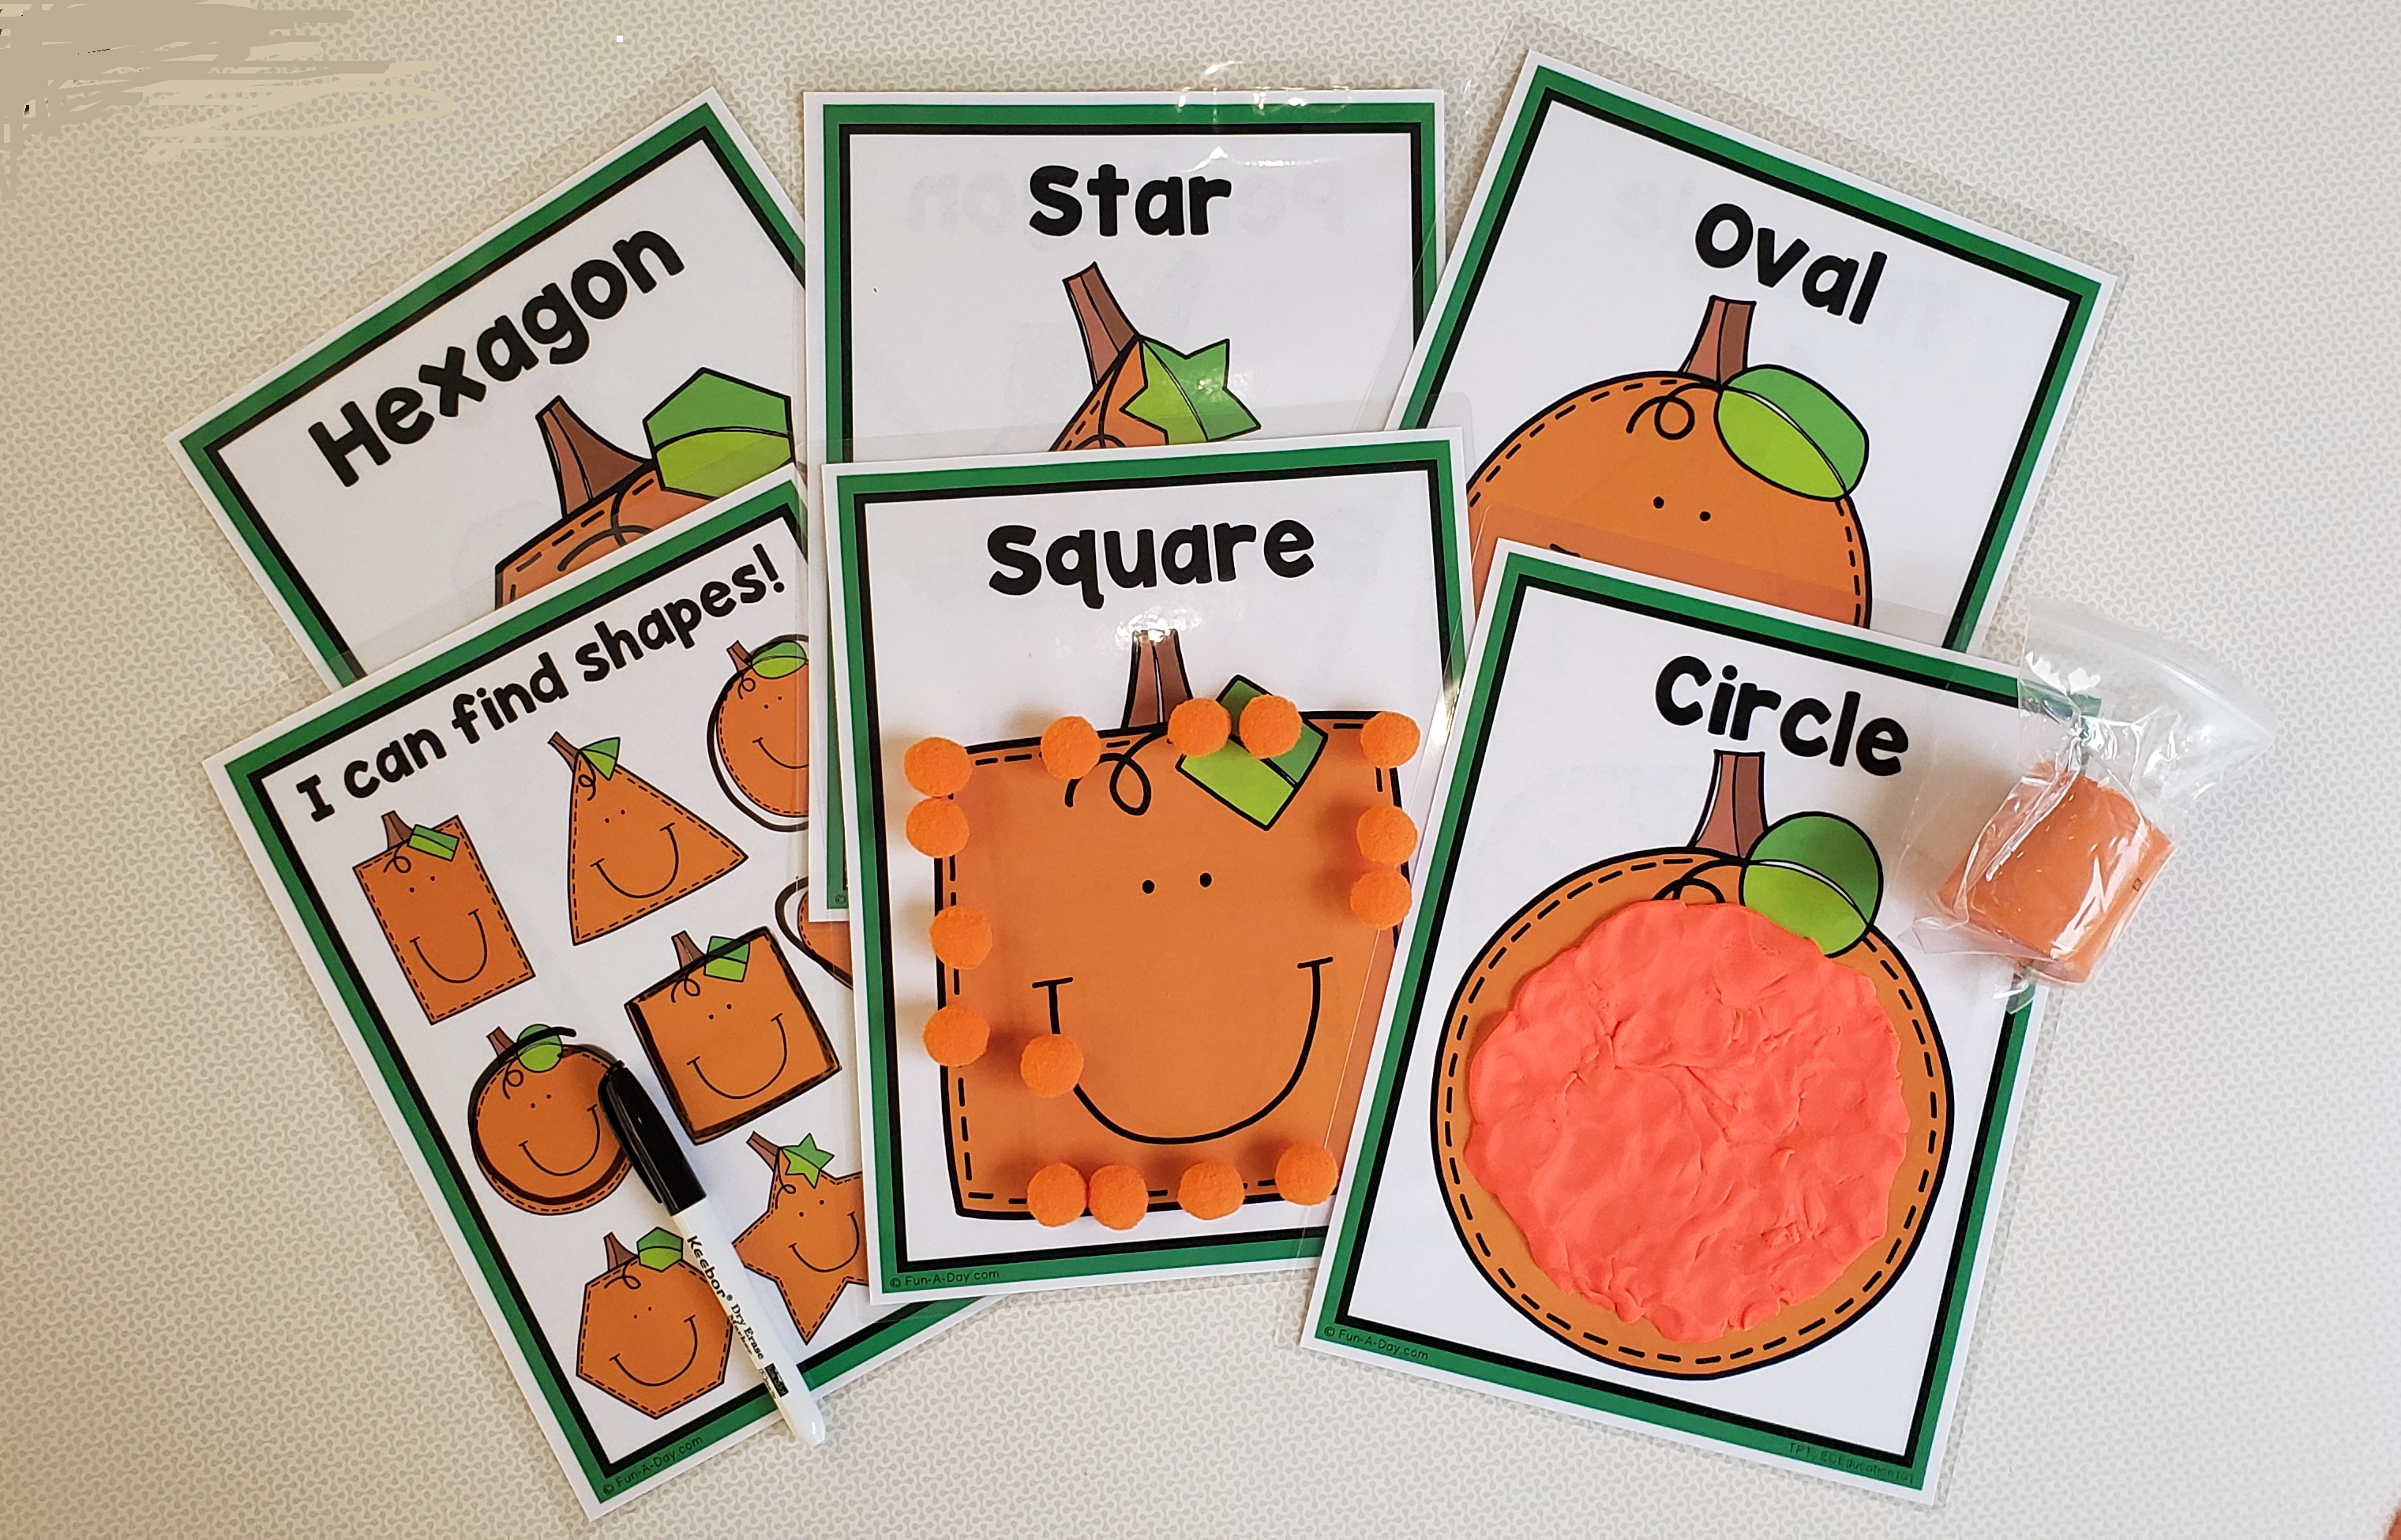 Image shows six laminated play mats with pumpkin shapes on them, a black dry erase marker, 15 pom-poms outlining a square-shaped pumpkin on one of the mats, orange play dough filling in a circle-shaped pumpkin on one of the other mats, and a bag of orange play dough.